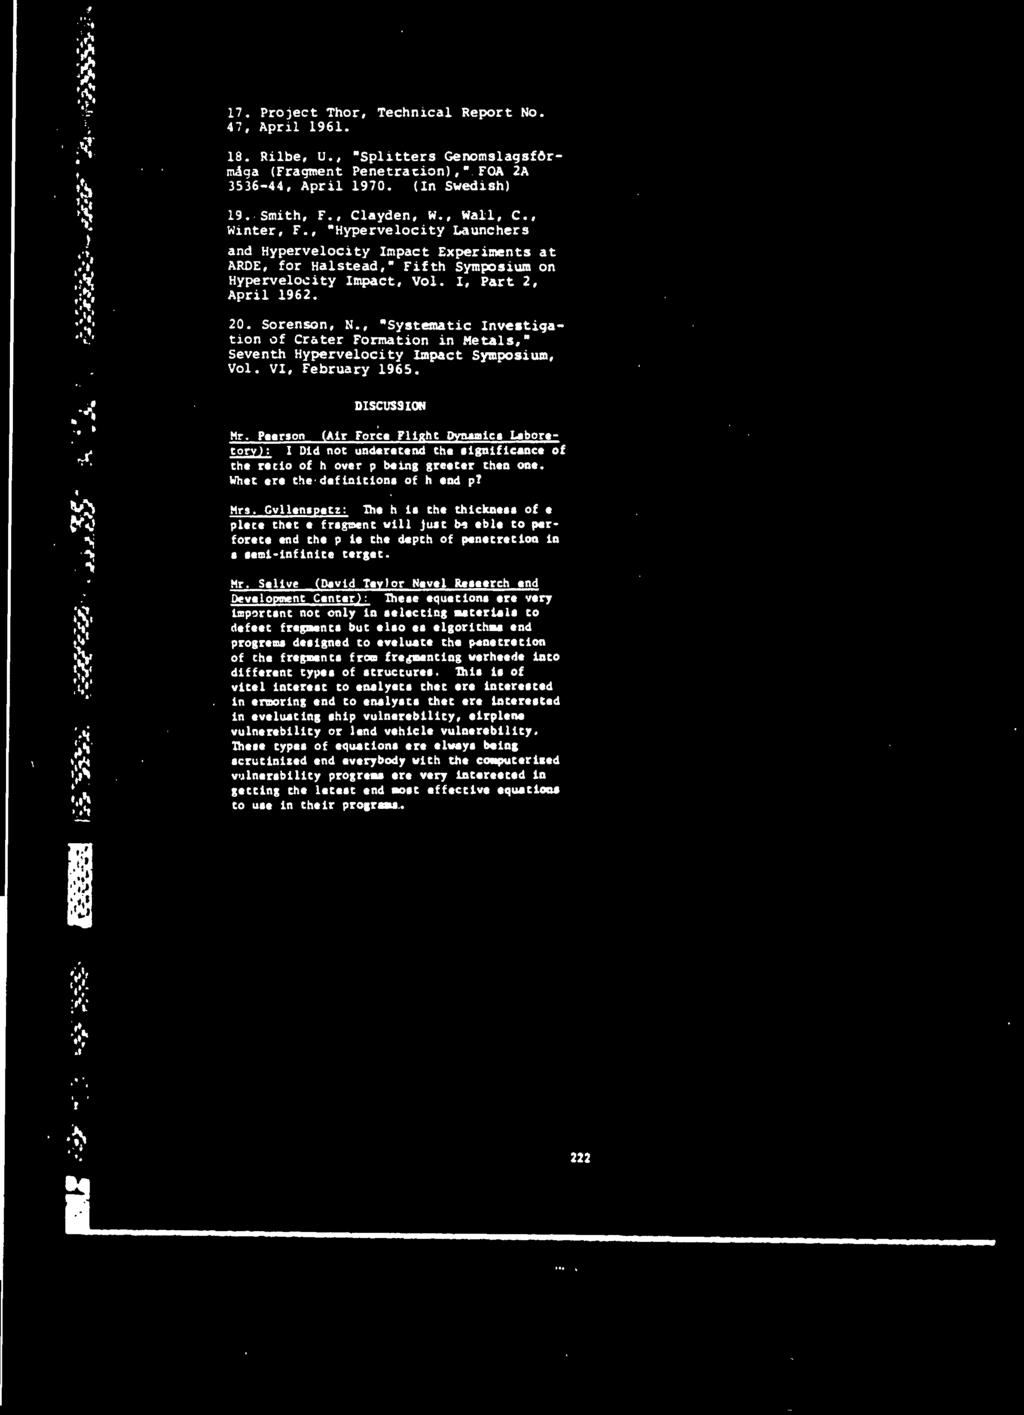 , "Systematic Investigation of Cräter Formation in Metals,* Seventh Hypervelocity Impact Symposium, Vol. VI, February 1965. DISCUSSION SS Mr.